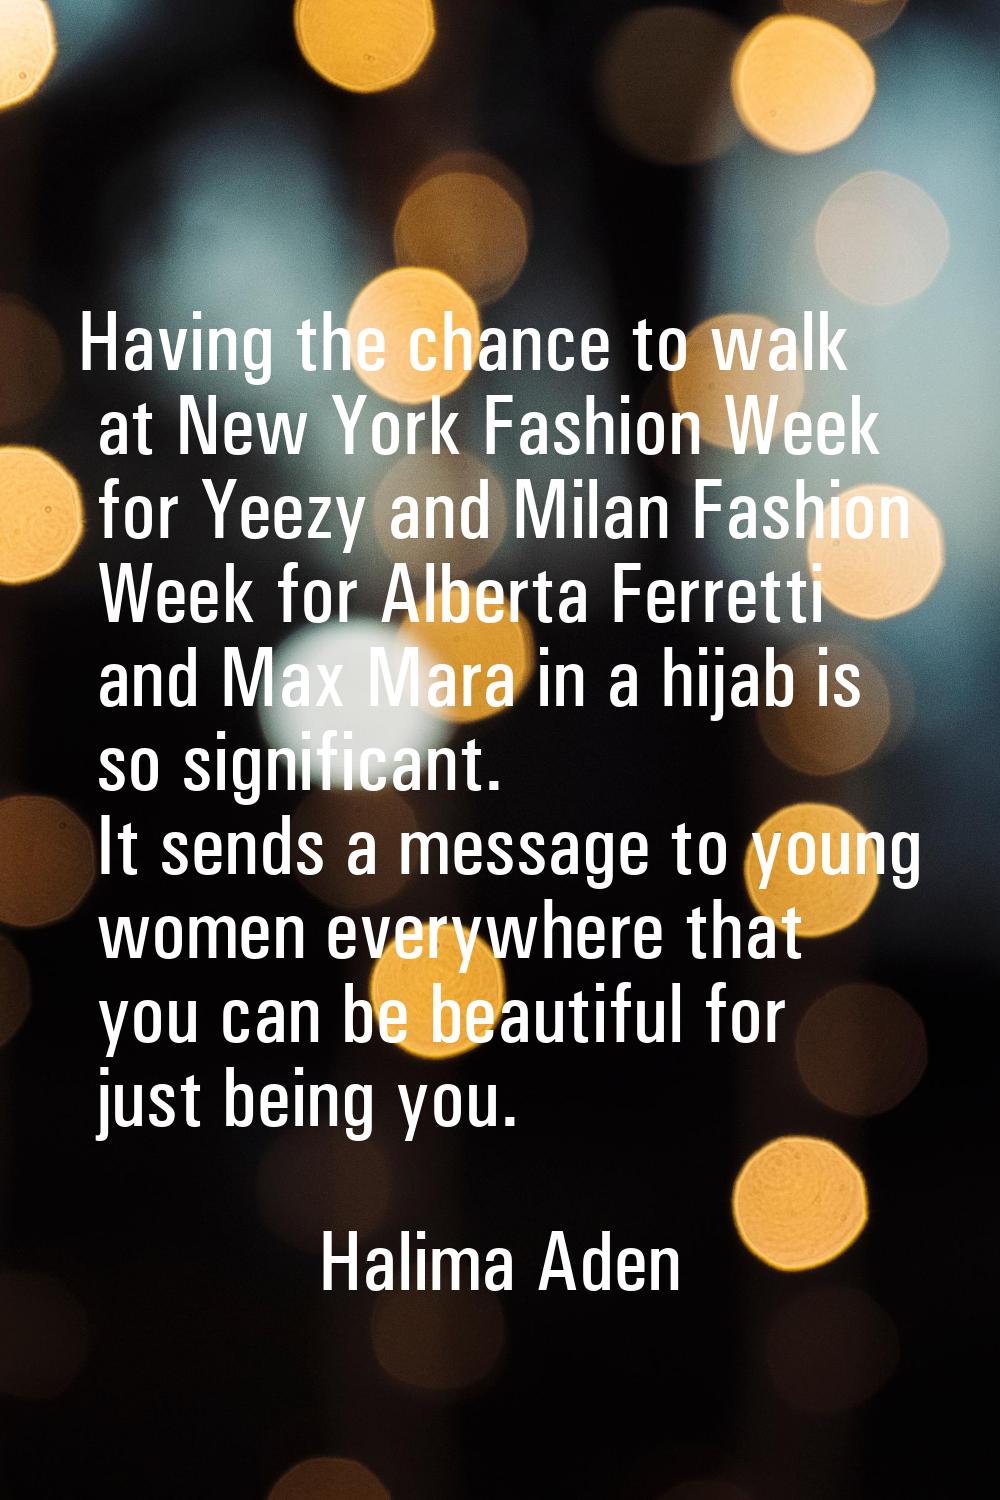 Having the chance to walk at New York Fashion Week for Yeezy and Milan Fashion Week for Alberta Fer